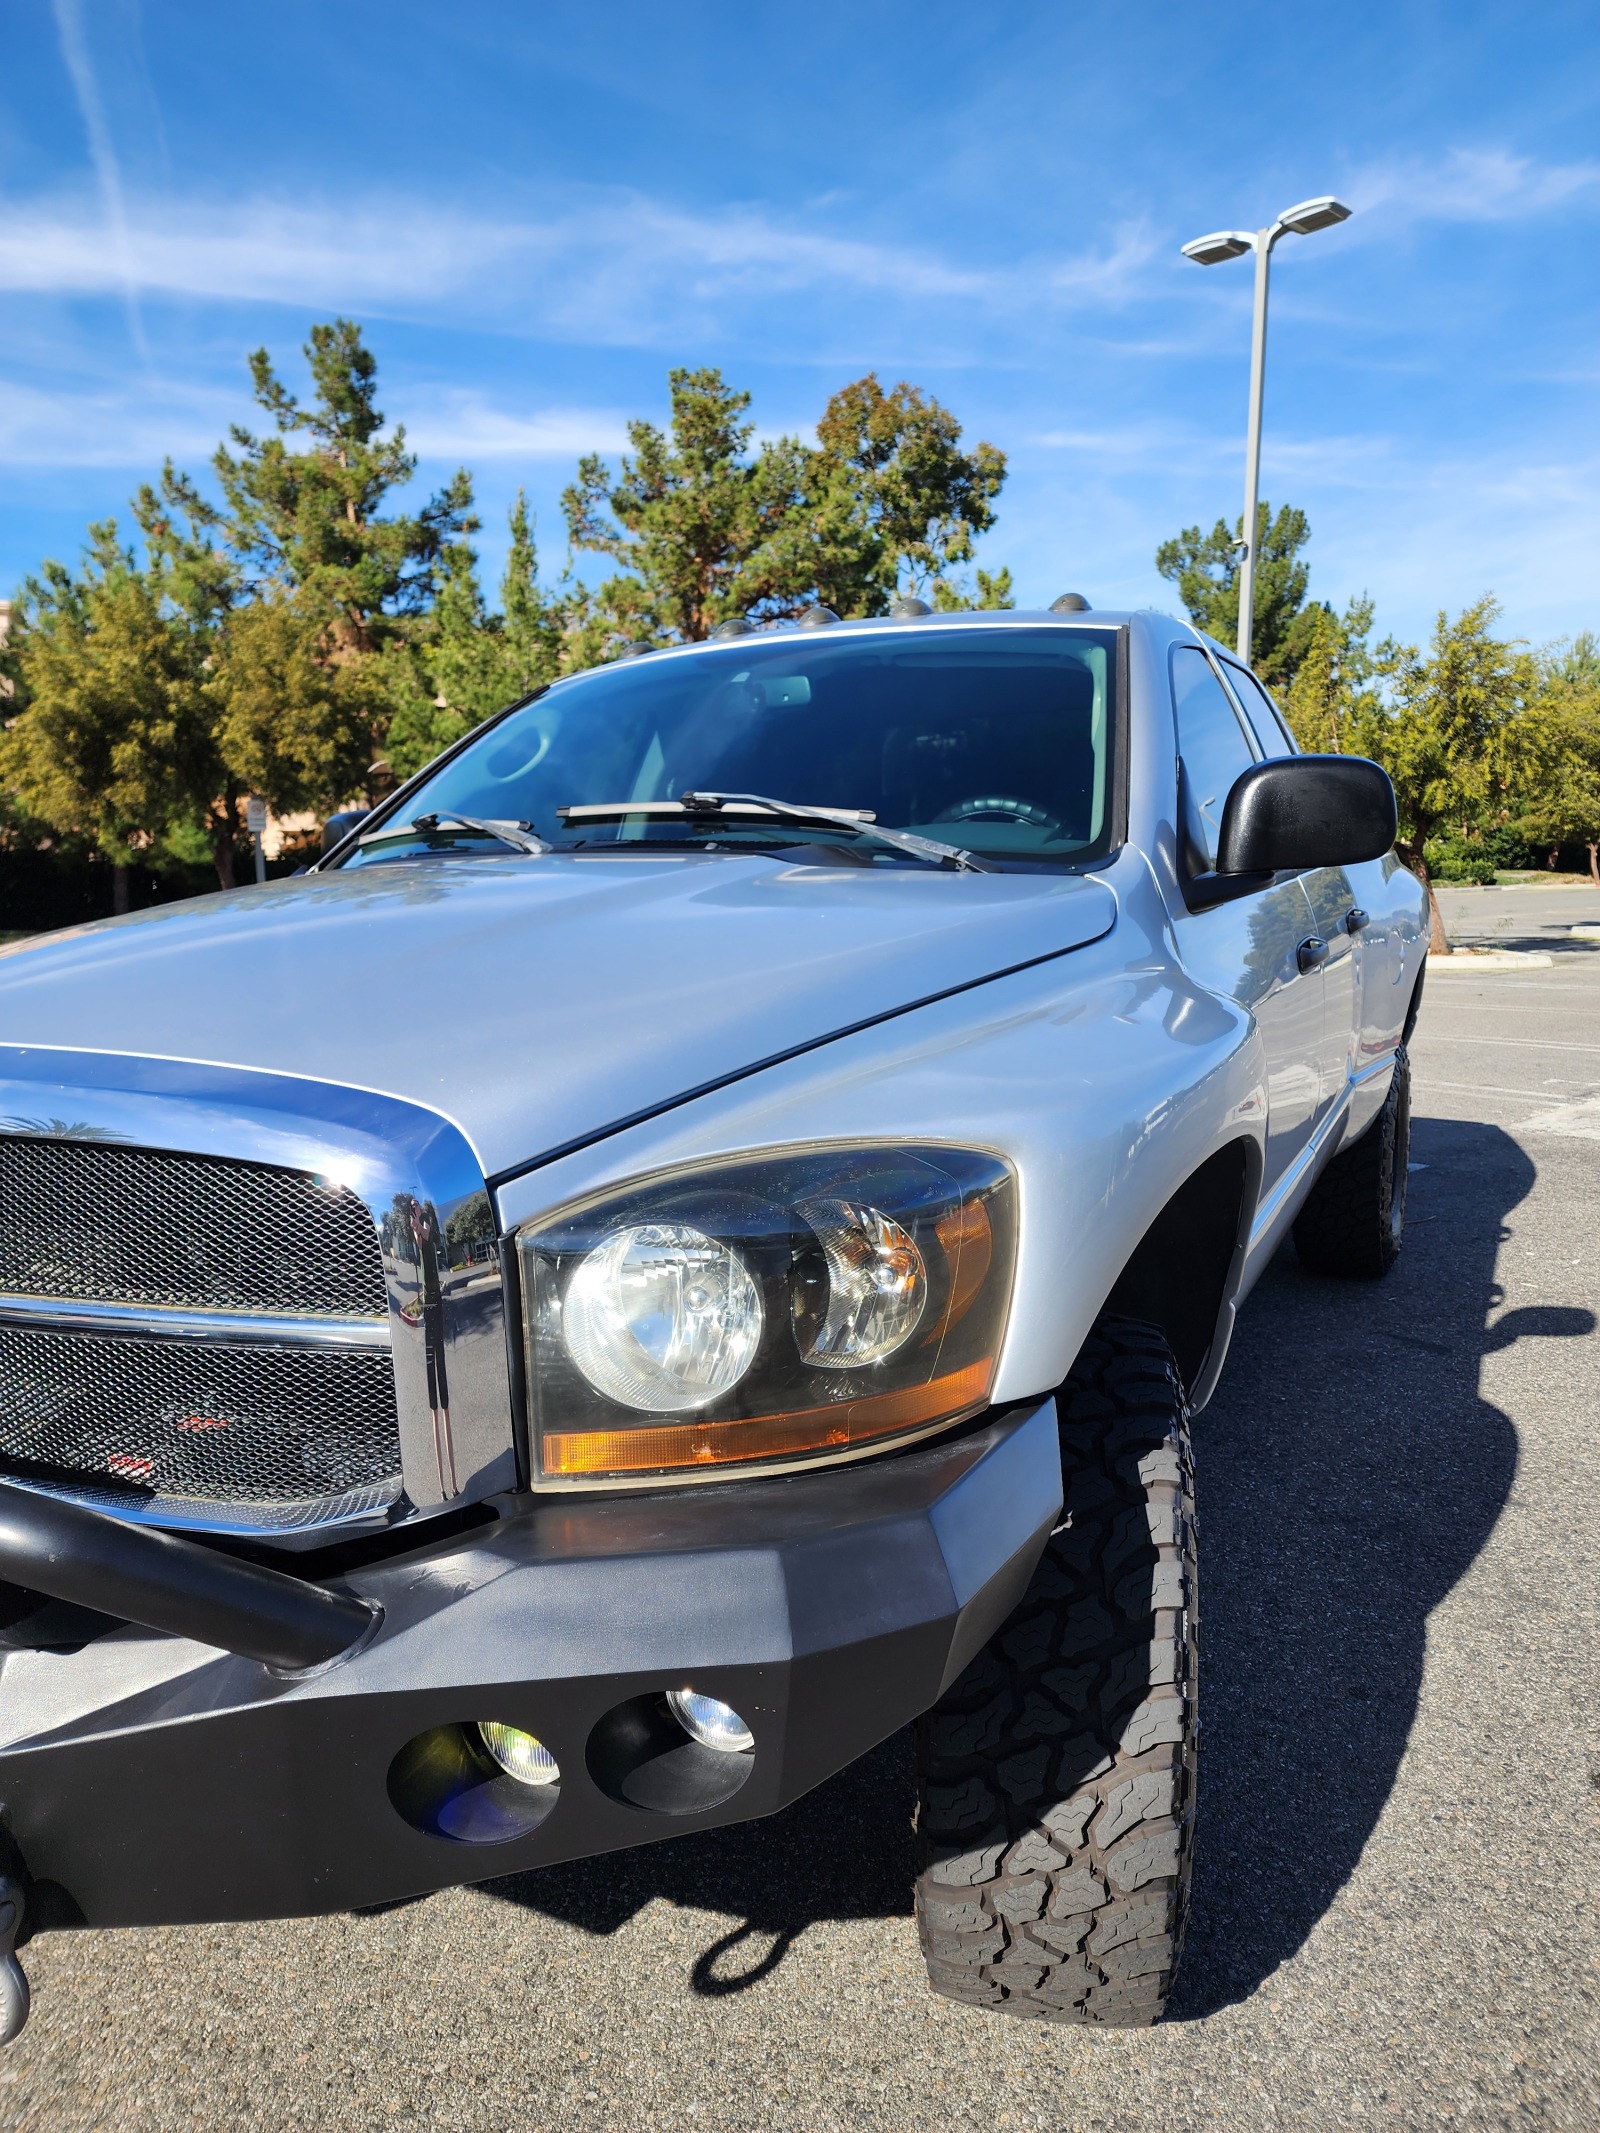 For Sale: *REDUCED* Clean 2006 Ram 1500 SLT 4x4 5.7L V8 | $20k+ UPGRADES | Well Maintained | Low Miles! - photo6